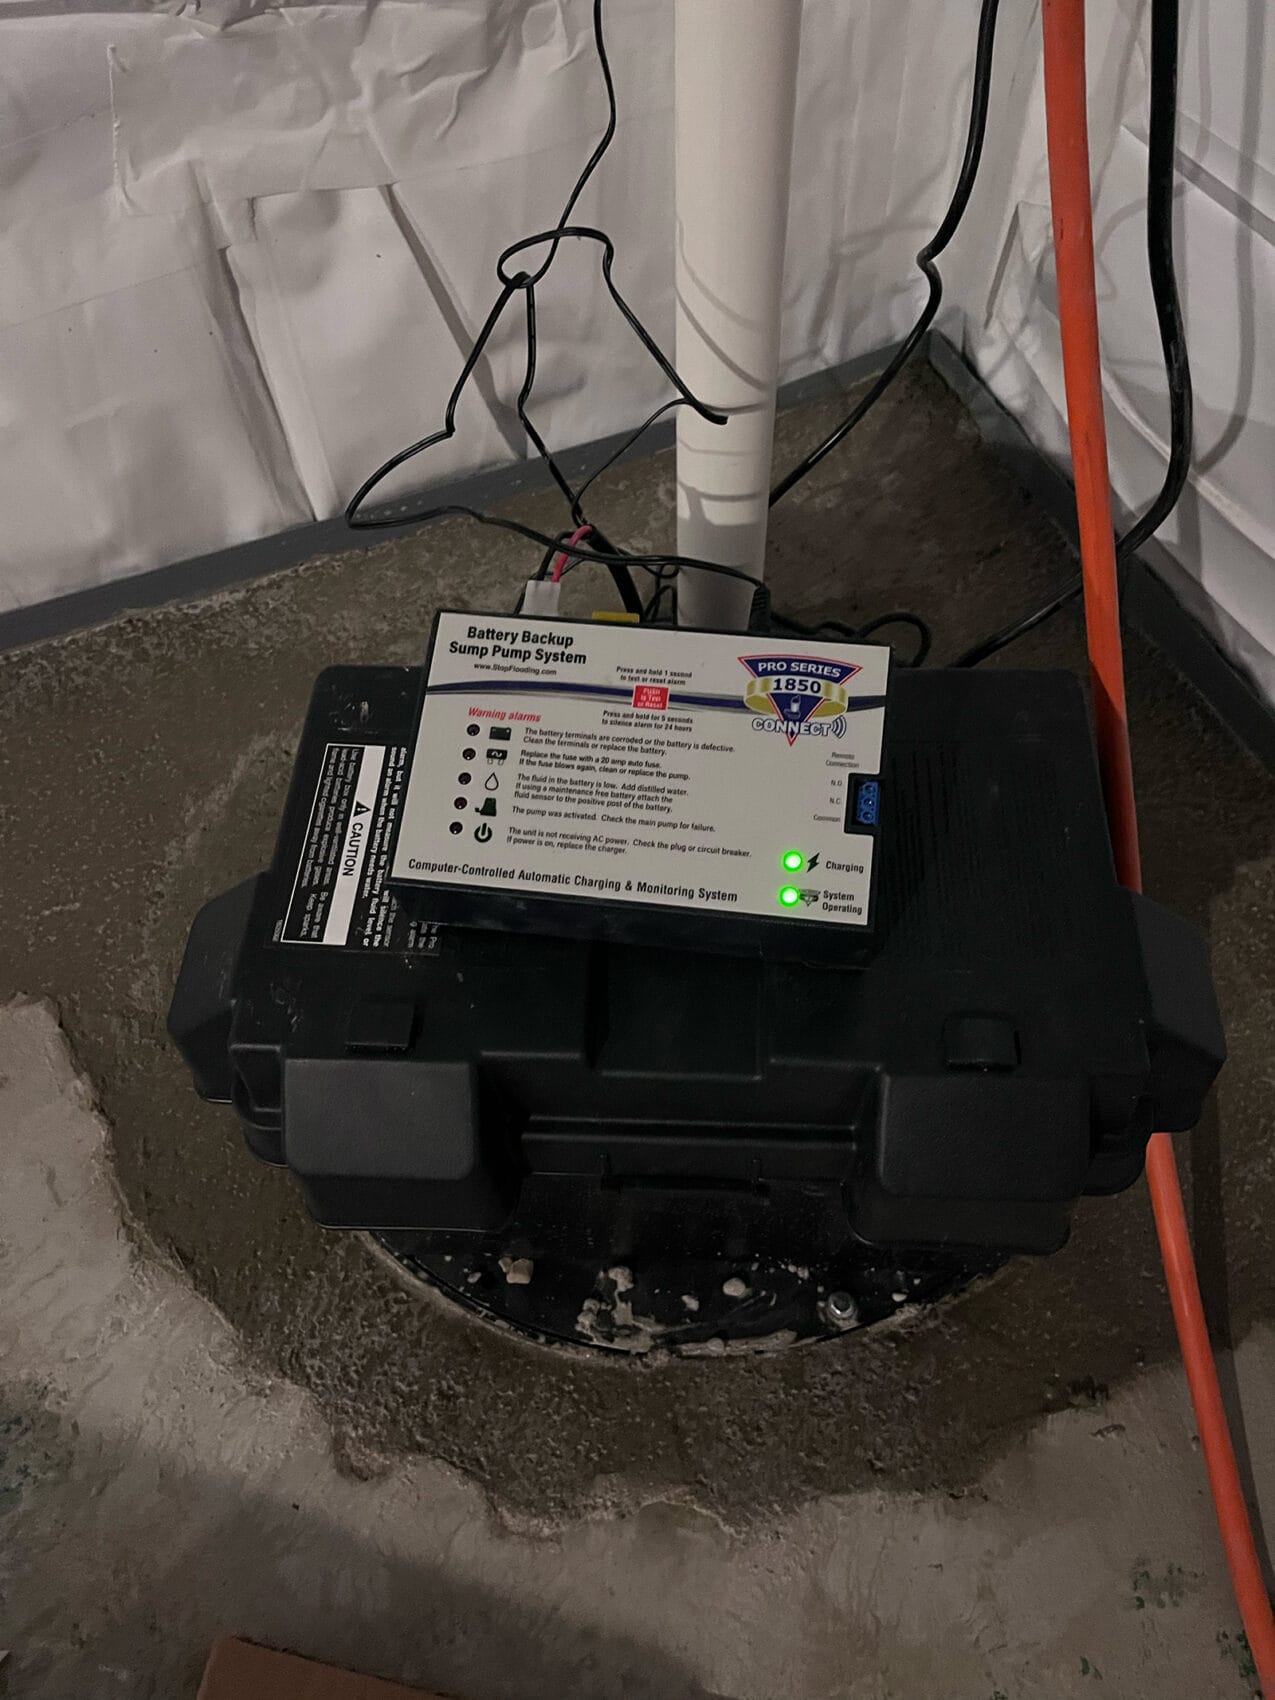 Sump pump with a battery backup